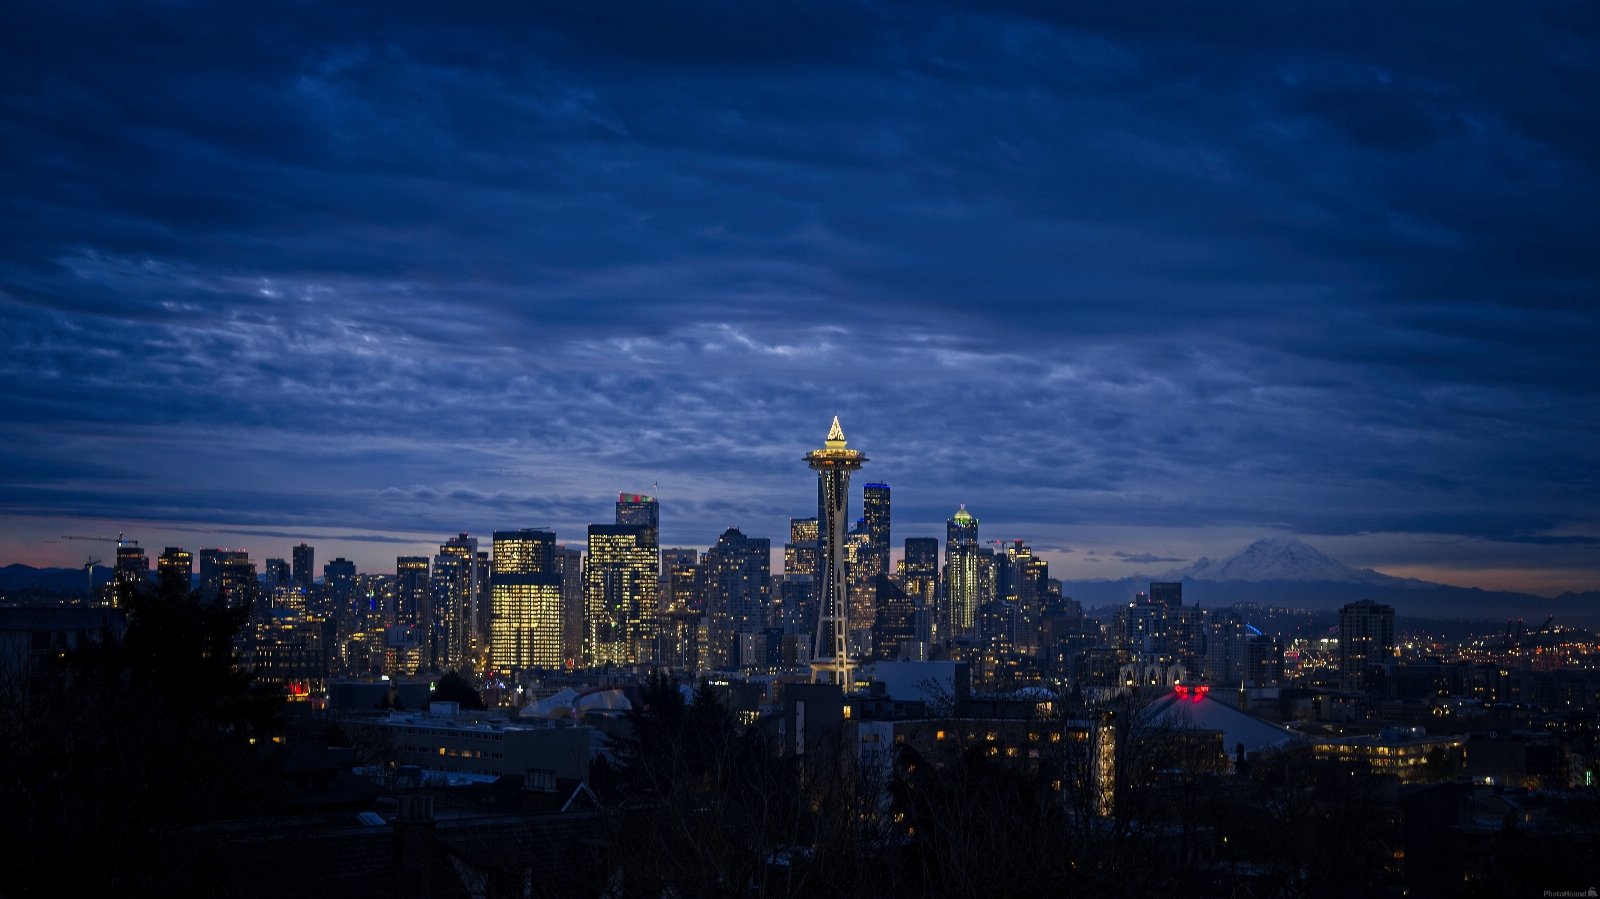 Image of Kerry Park by colin craig